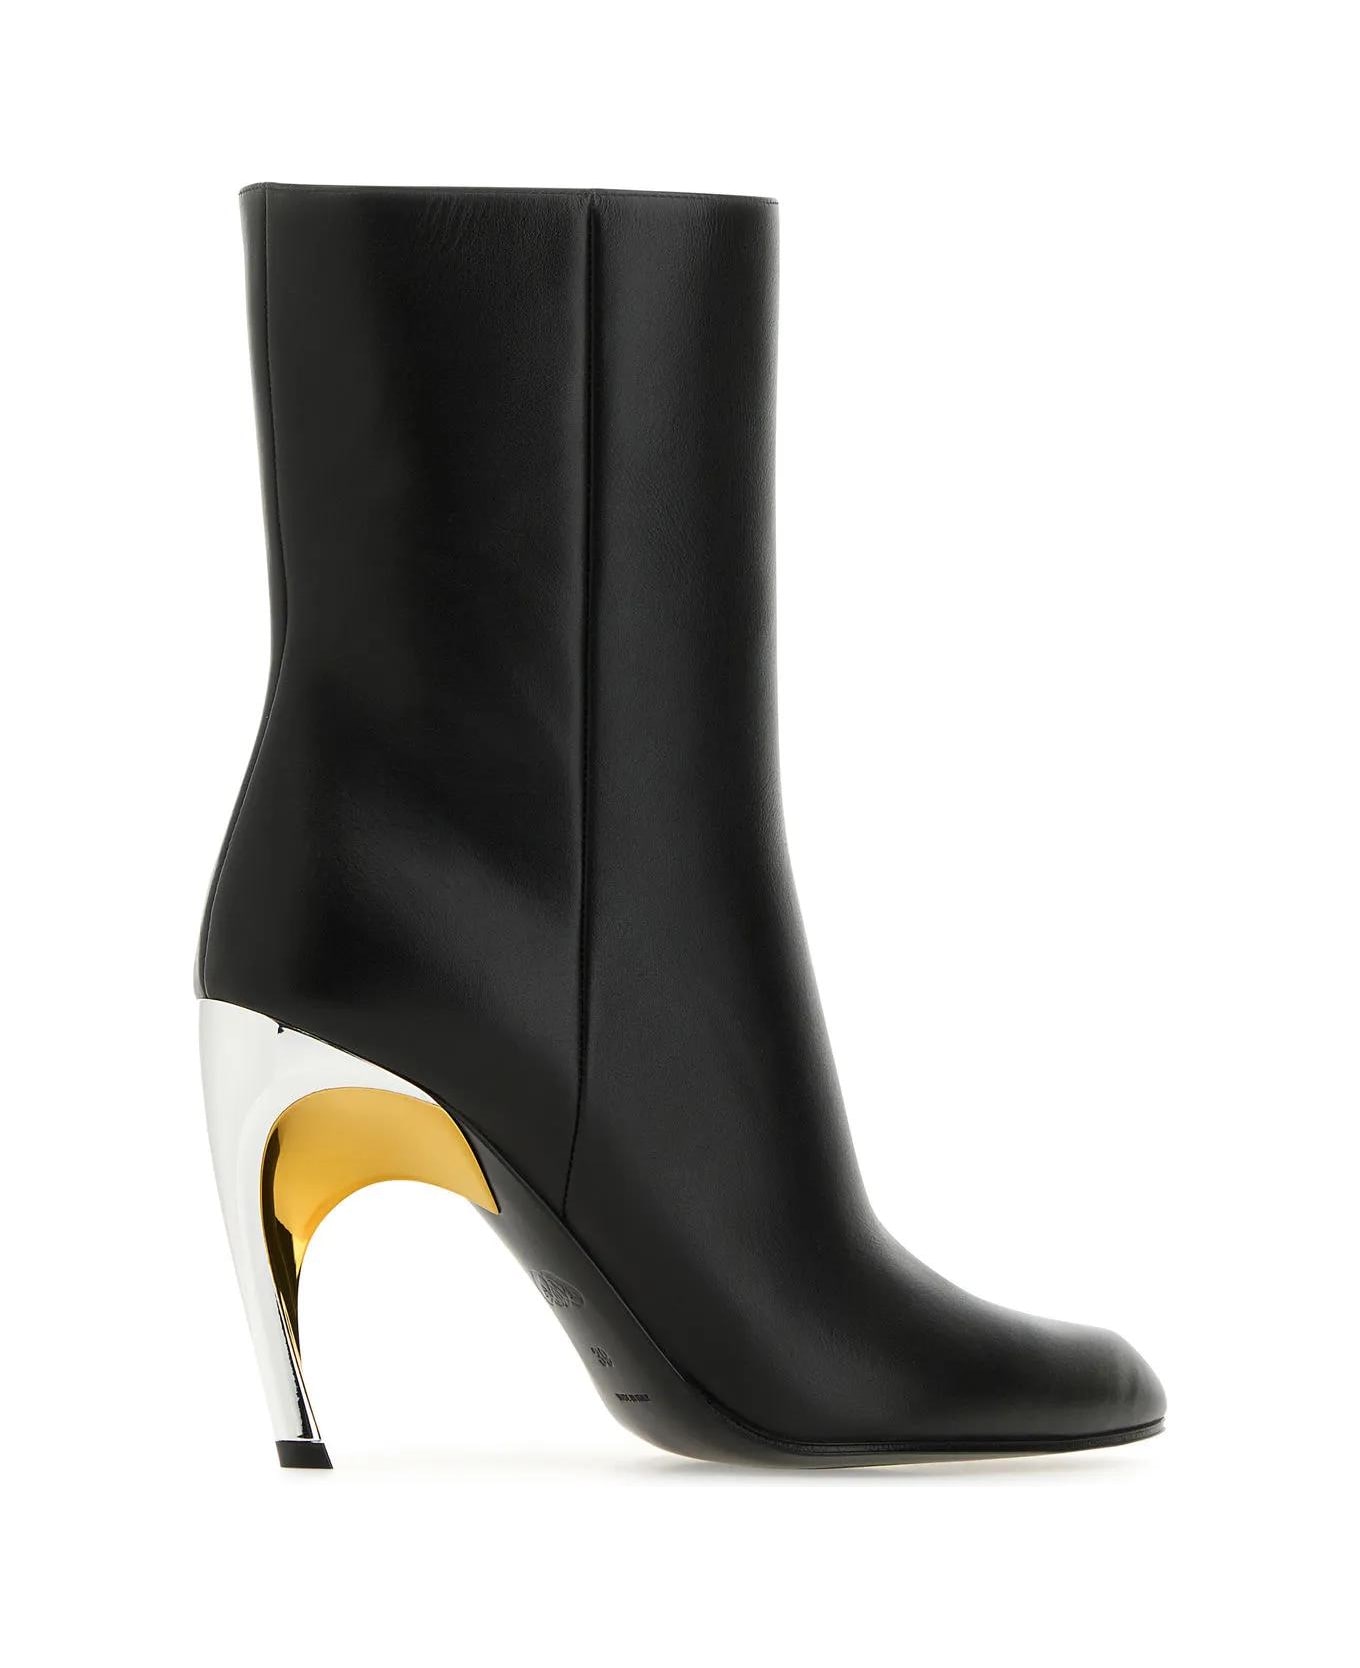 Alexander McQueen Armadillo Ankle Boots - Black/silver/gold ブーツ